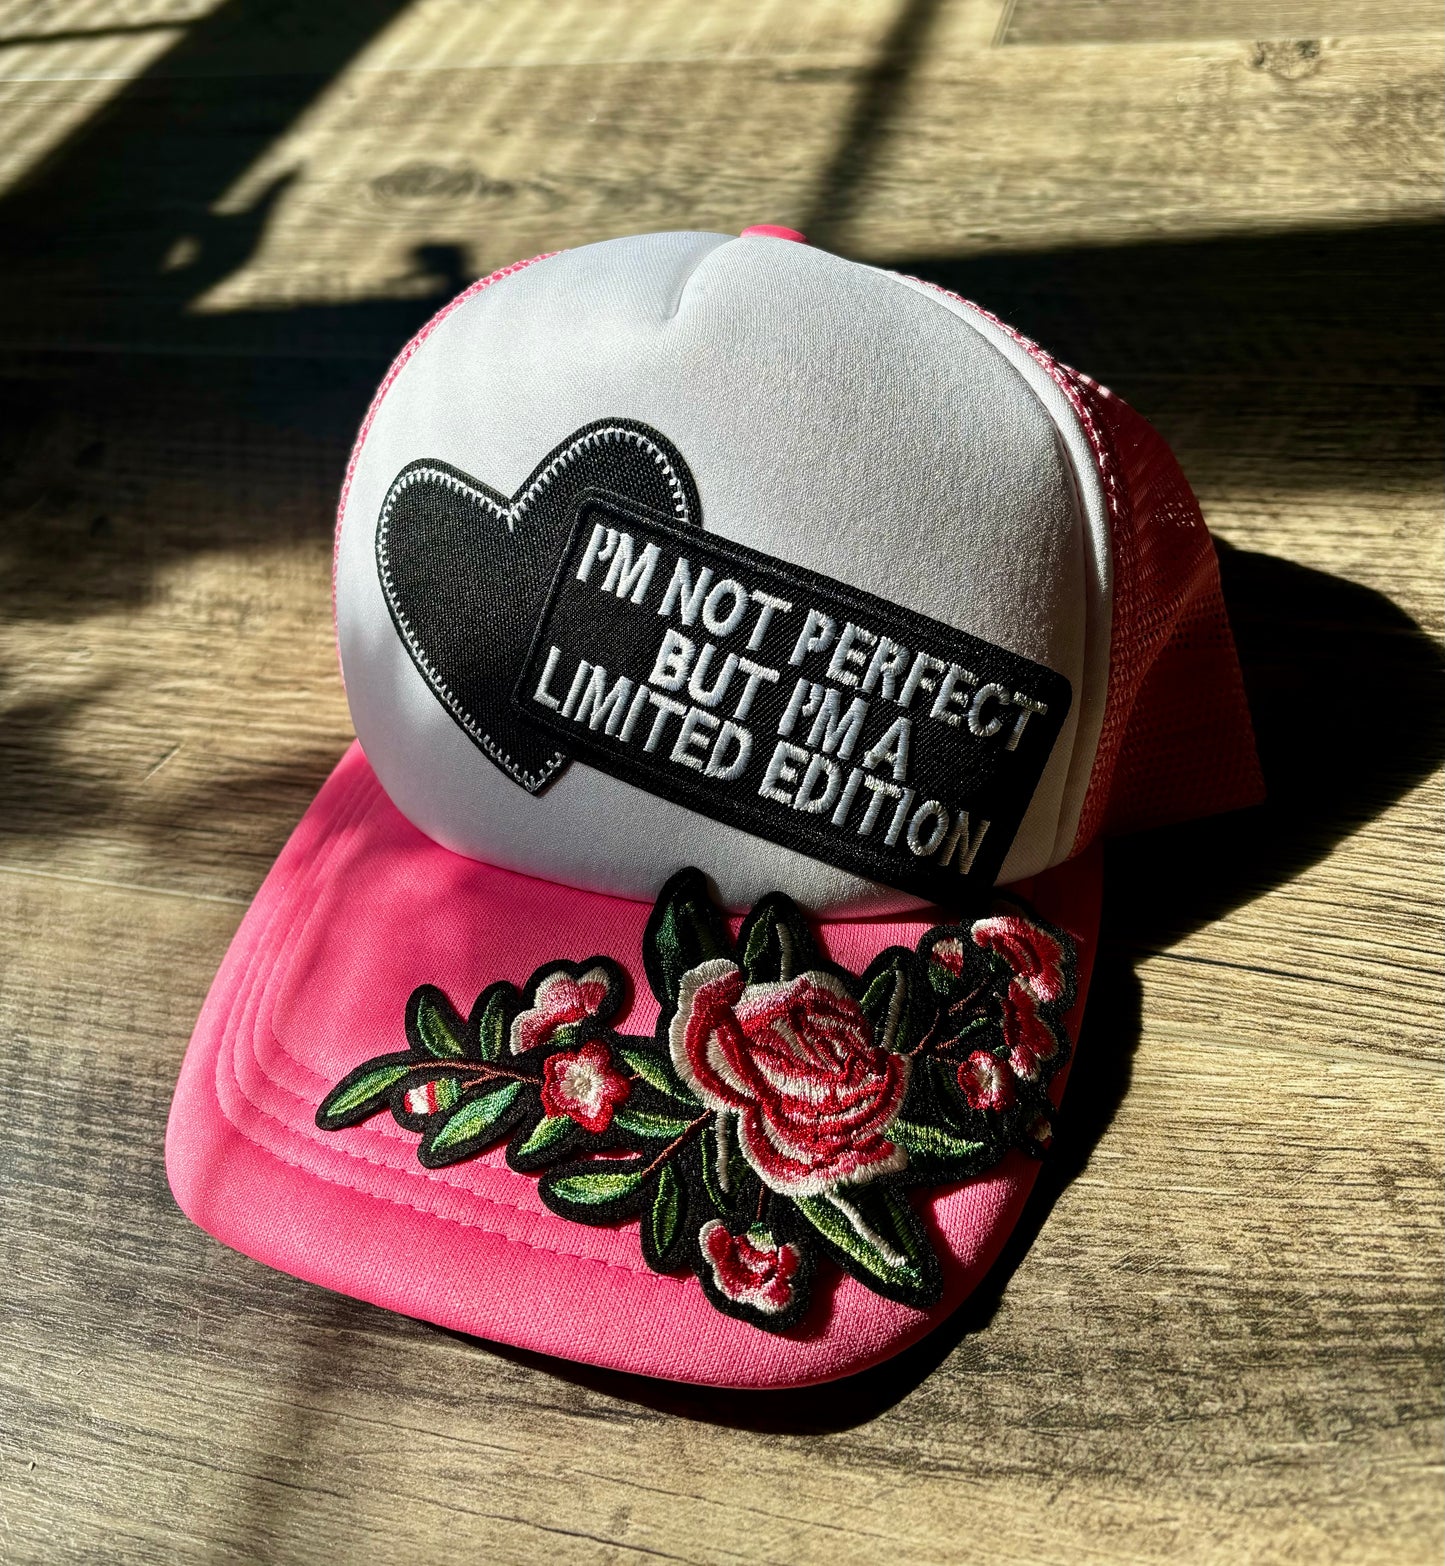 Limited Edition Trucker Hat